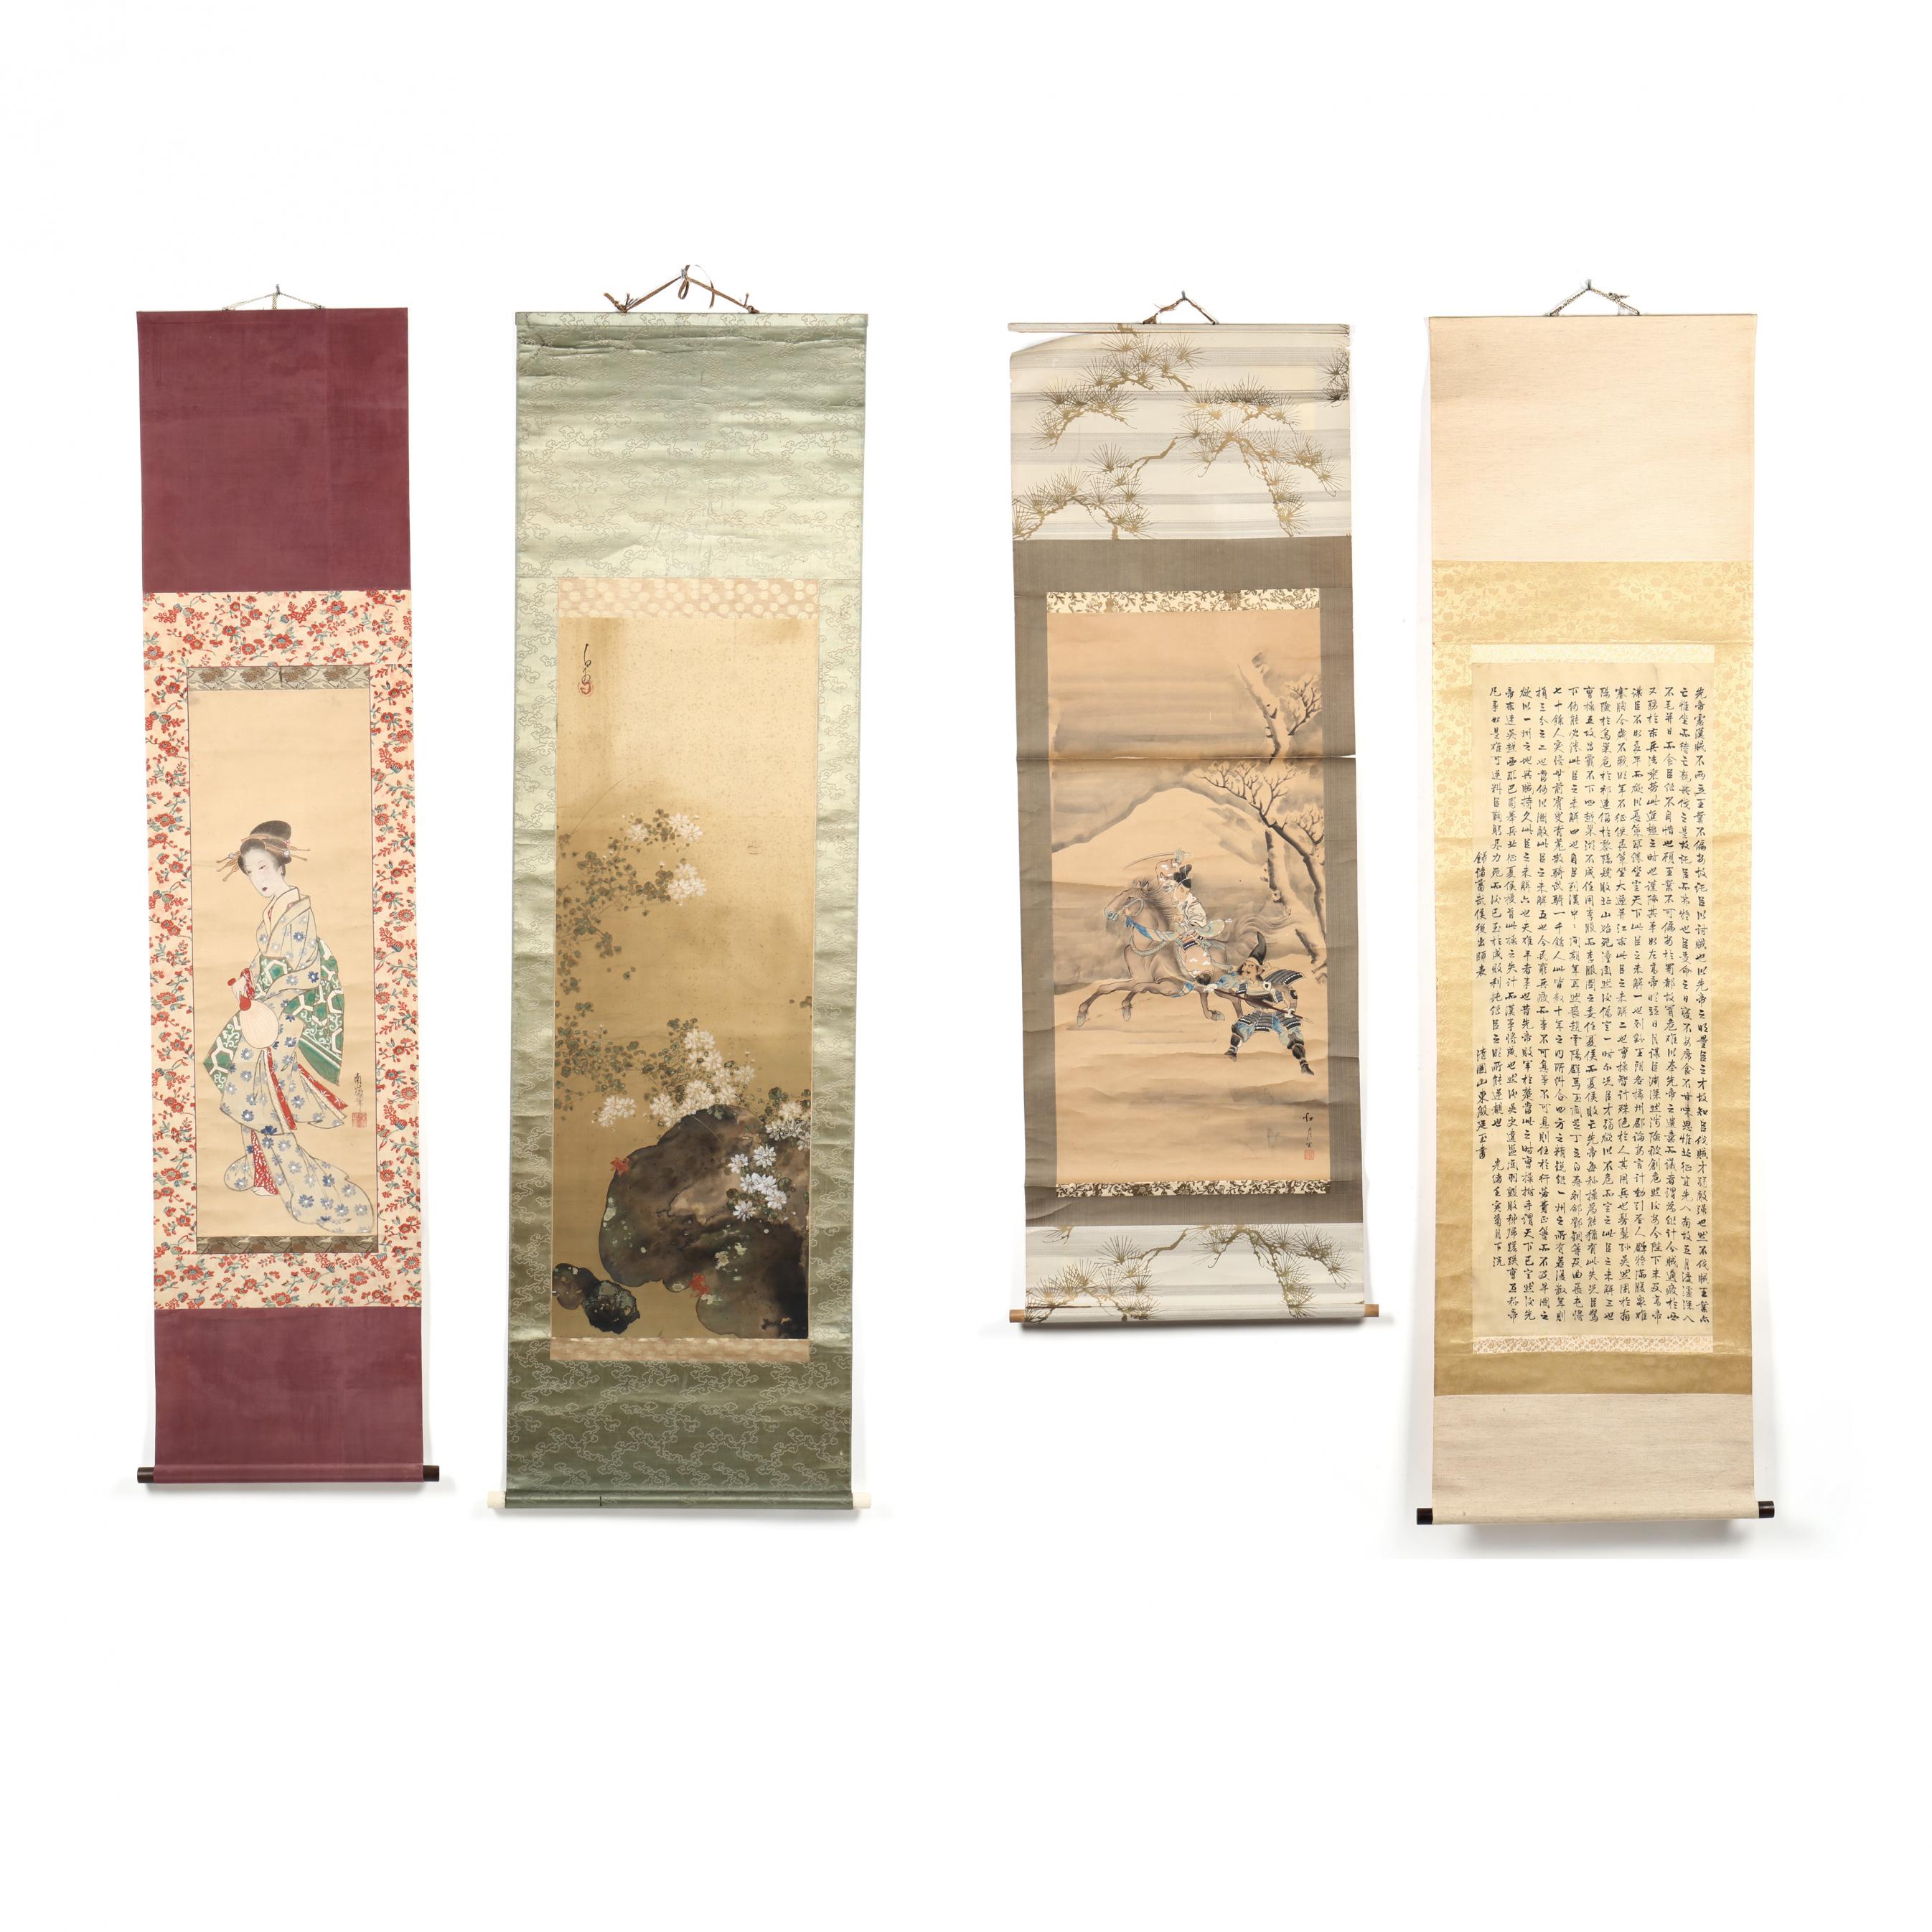 A Group of Four Japanese Kakemono Hanging Scrolls (Lot 1029 - The